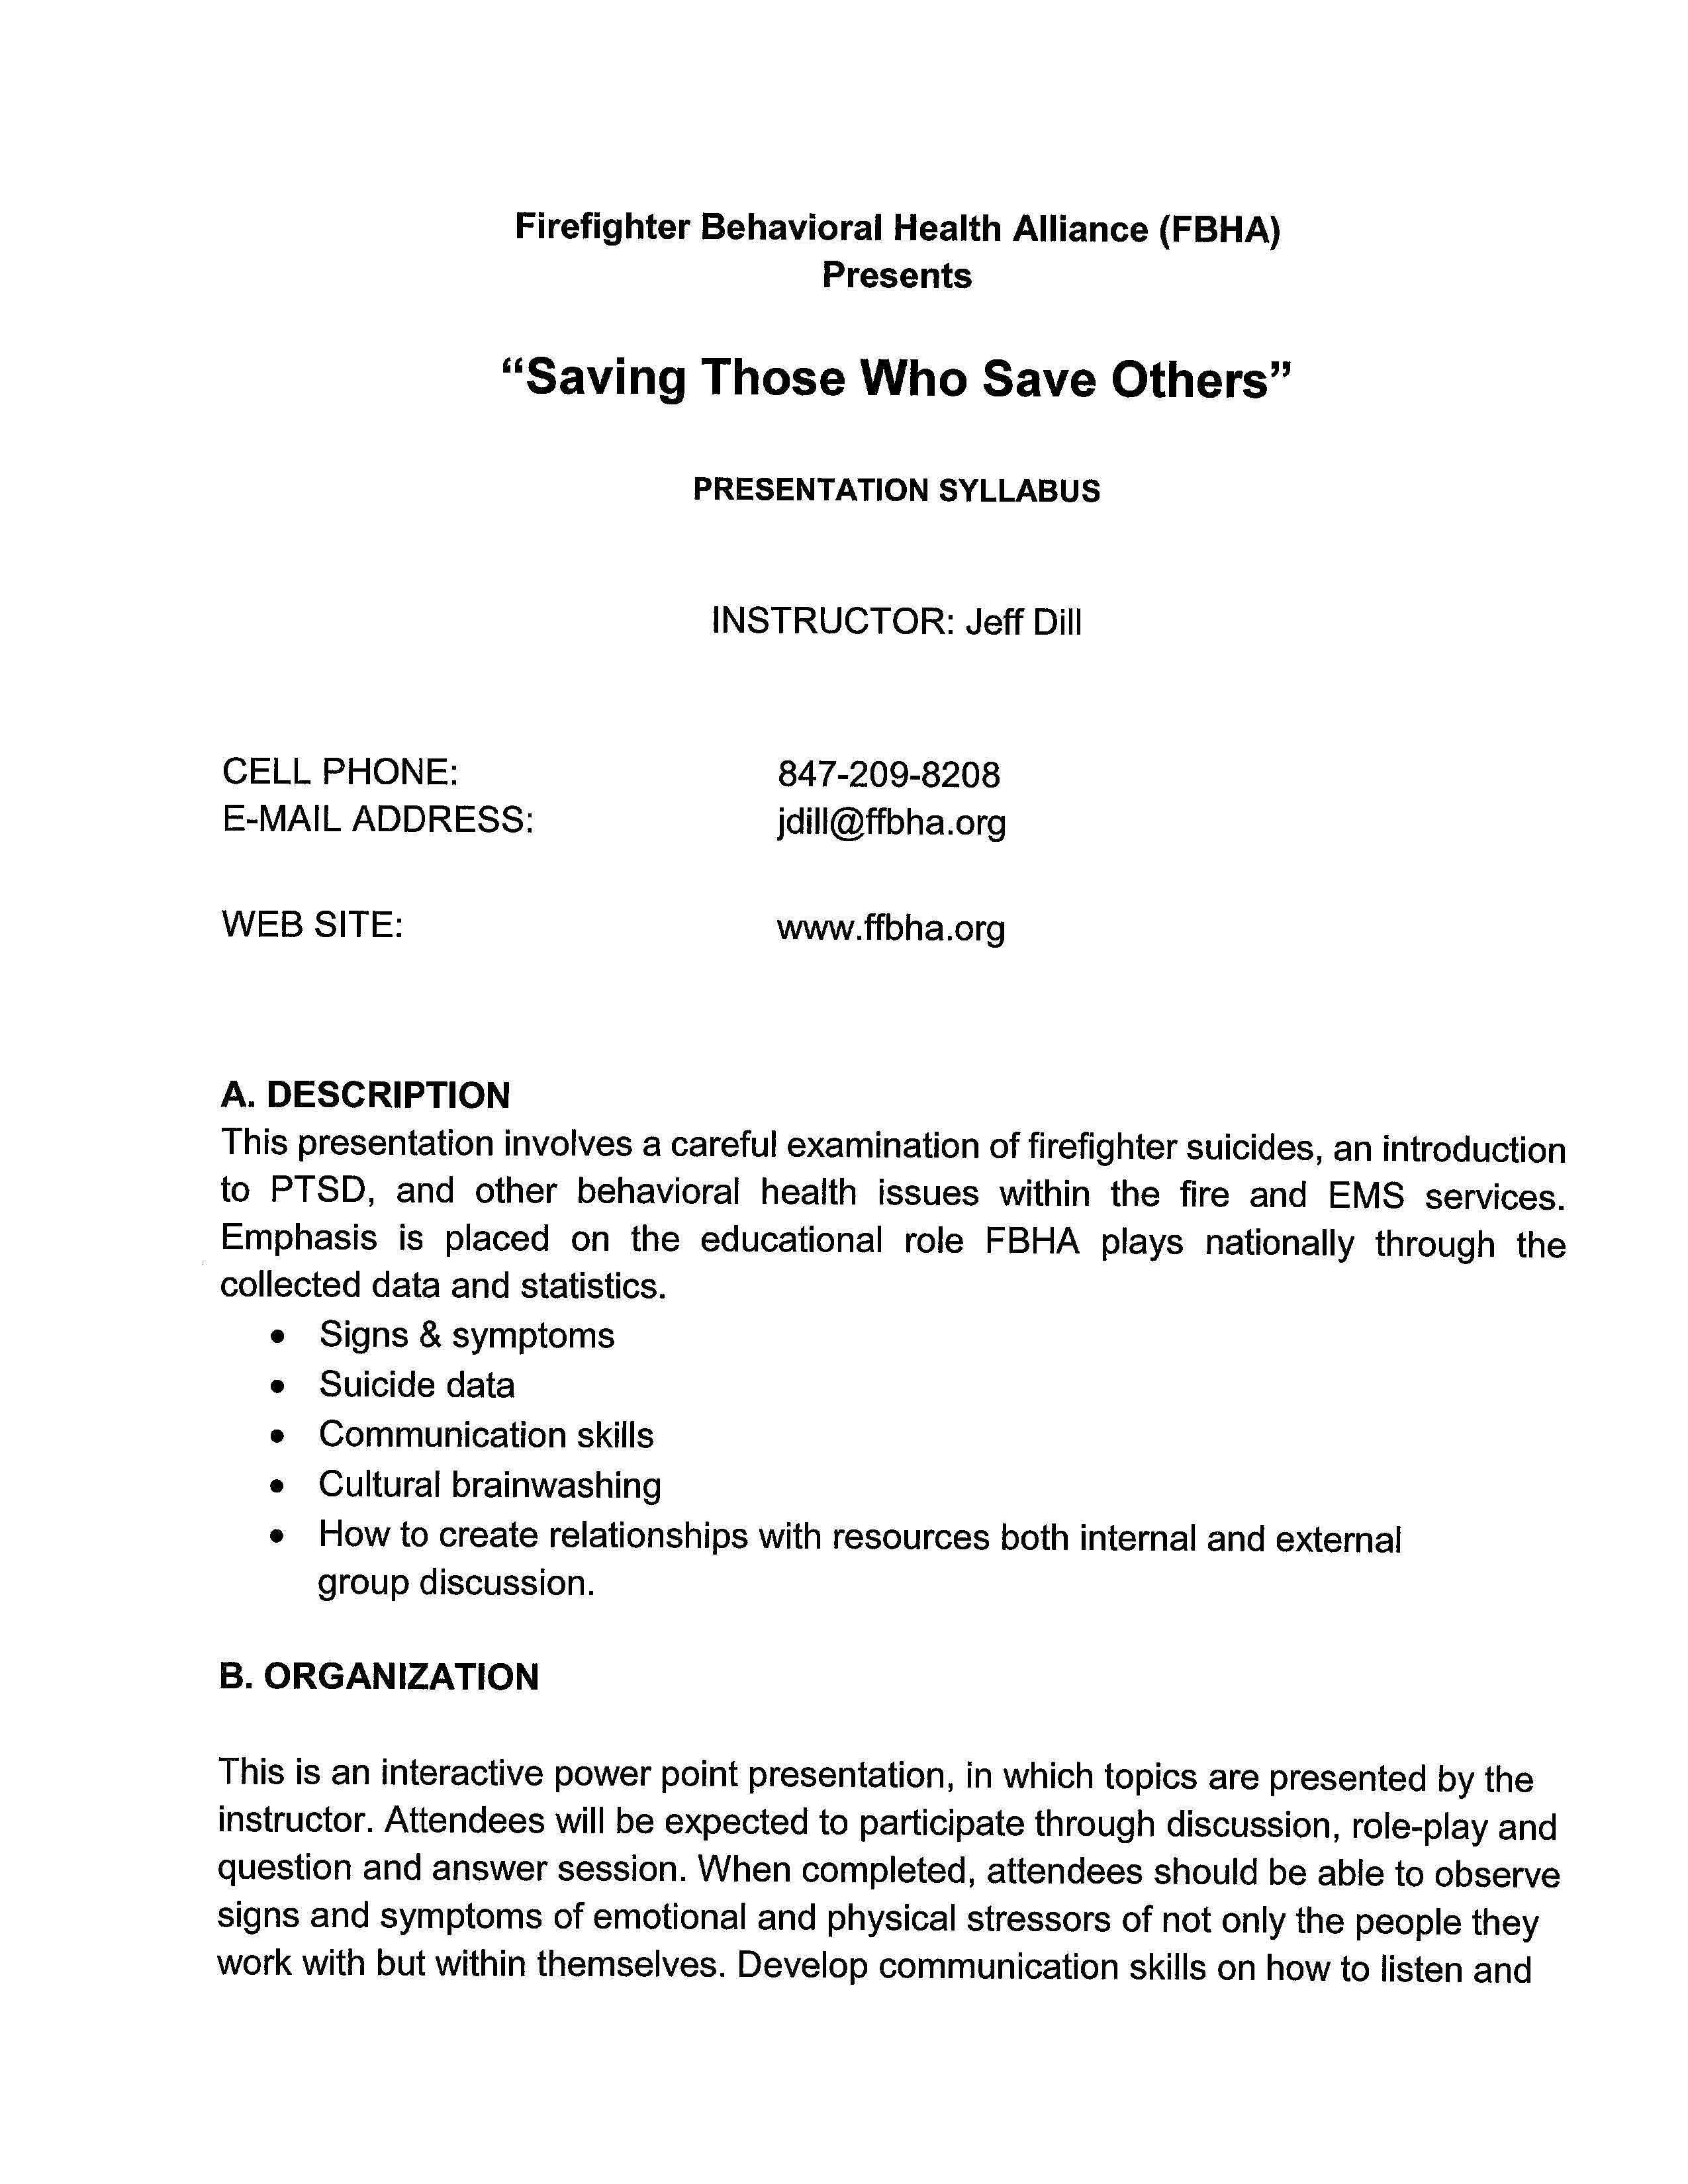 Saving Those Who Save Others_Page_1